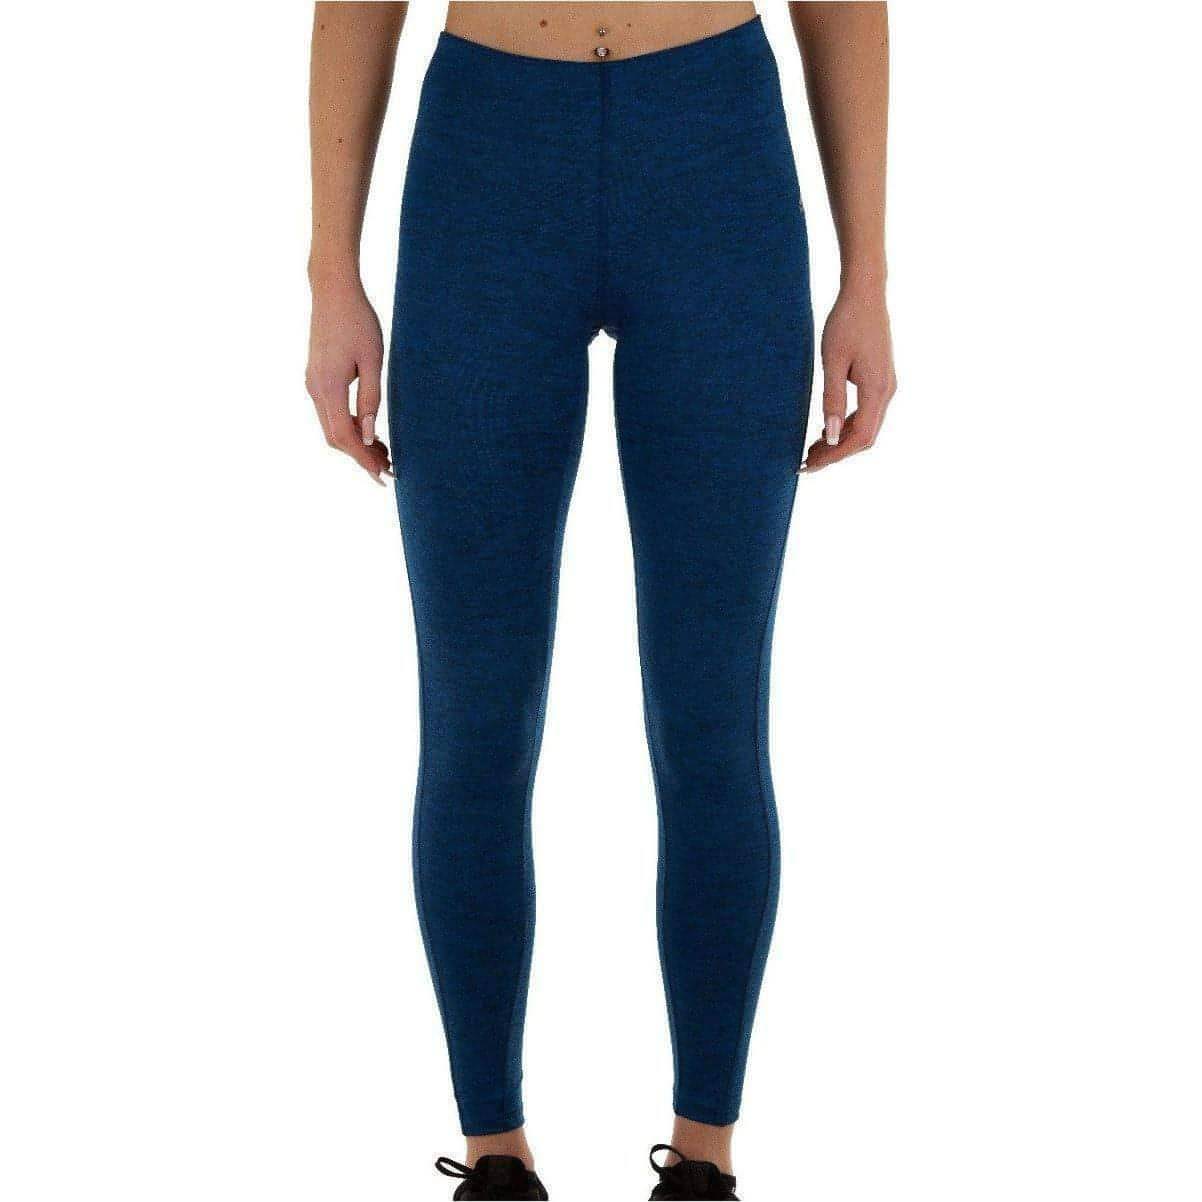 More Mile Train To Run Womens Long Running Tights - Blue - Start Fitness